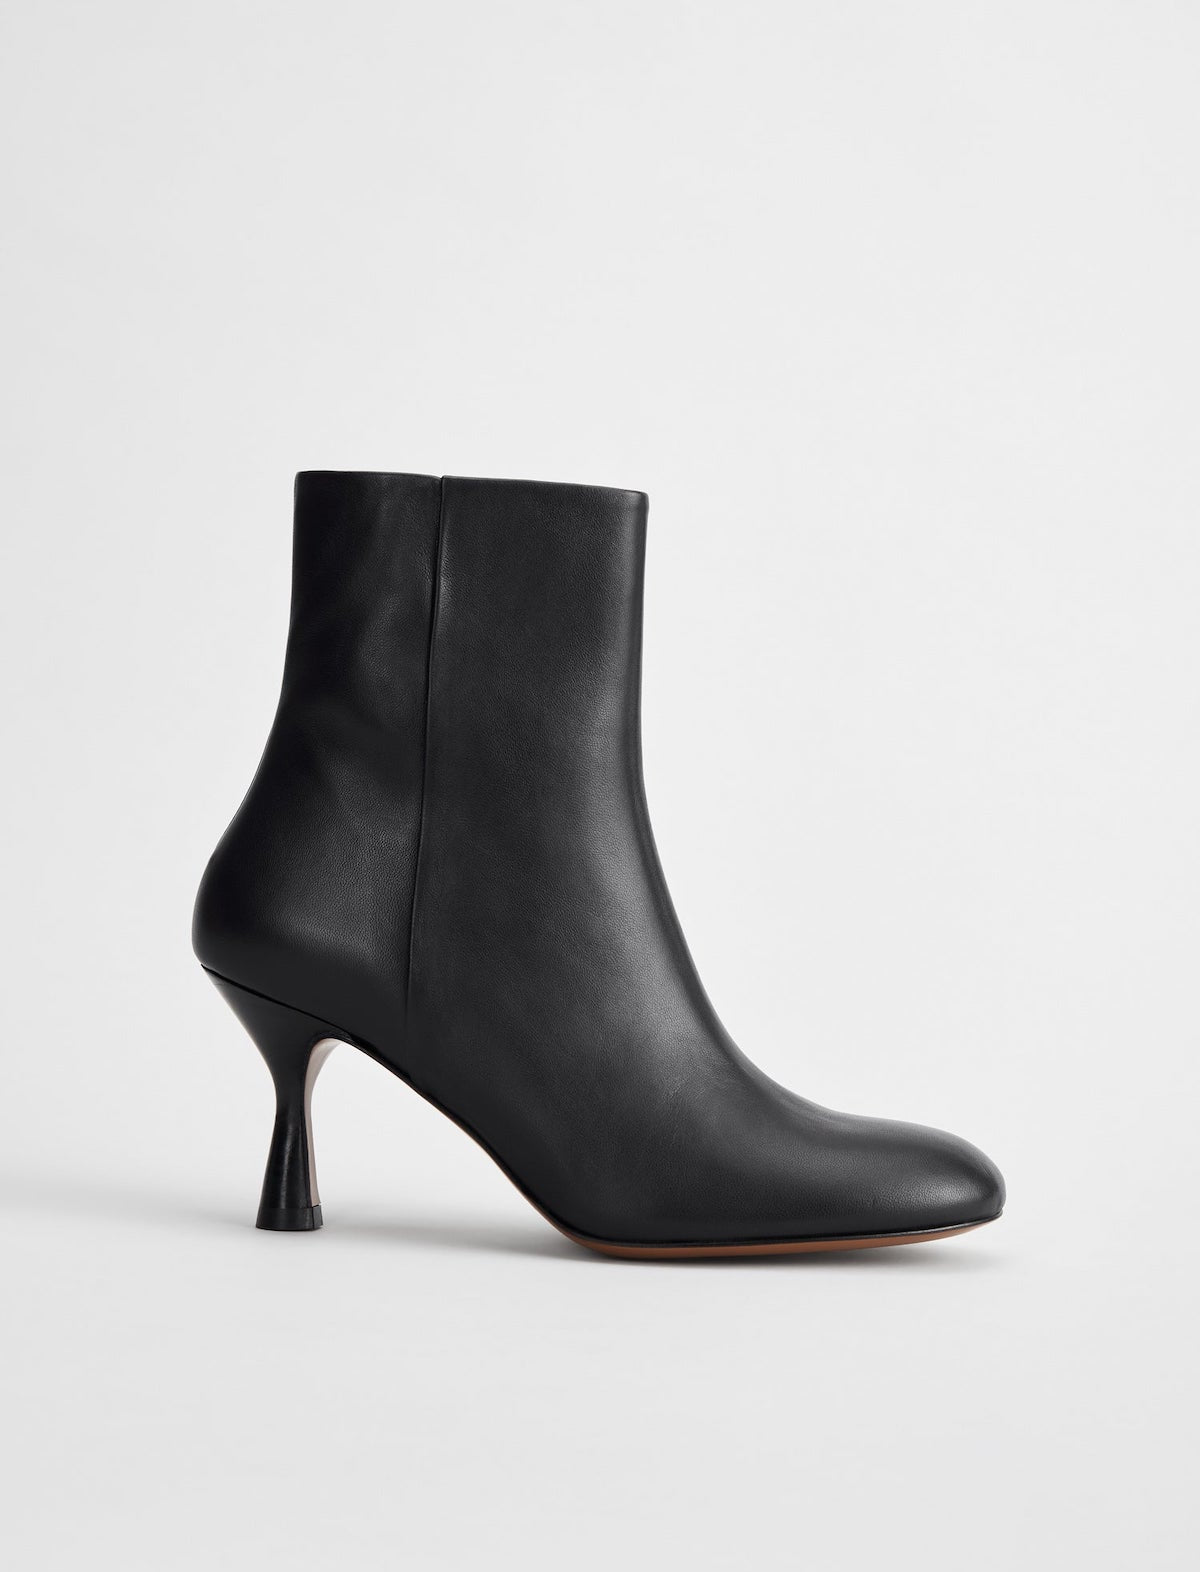 ATP ATELIER Carisio Nappa Leather Boots in Black